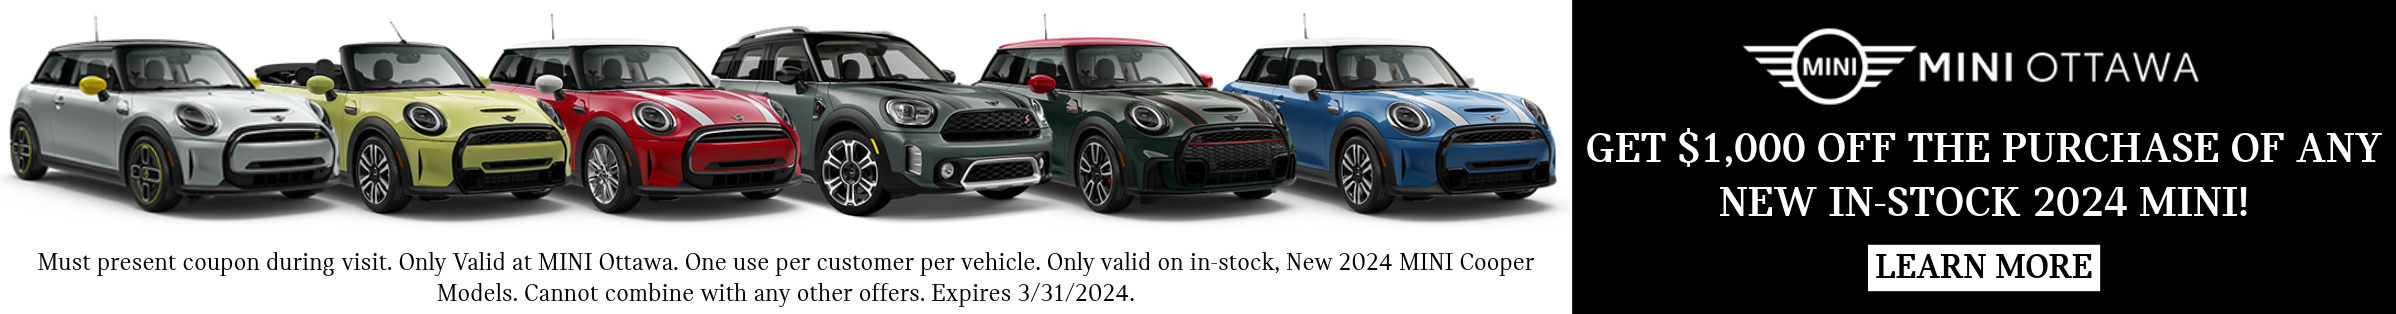 GET $1,000 OFF THE PURCHASE OF ANY NEW IN-STOCK 2024 MINI!